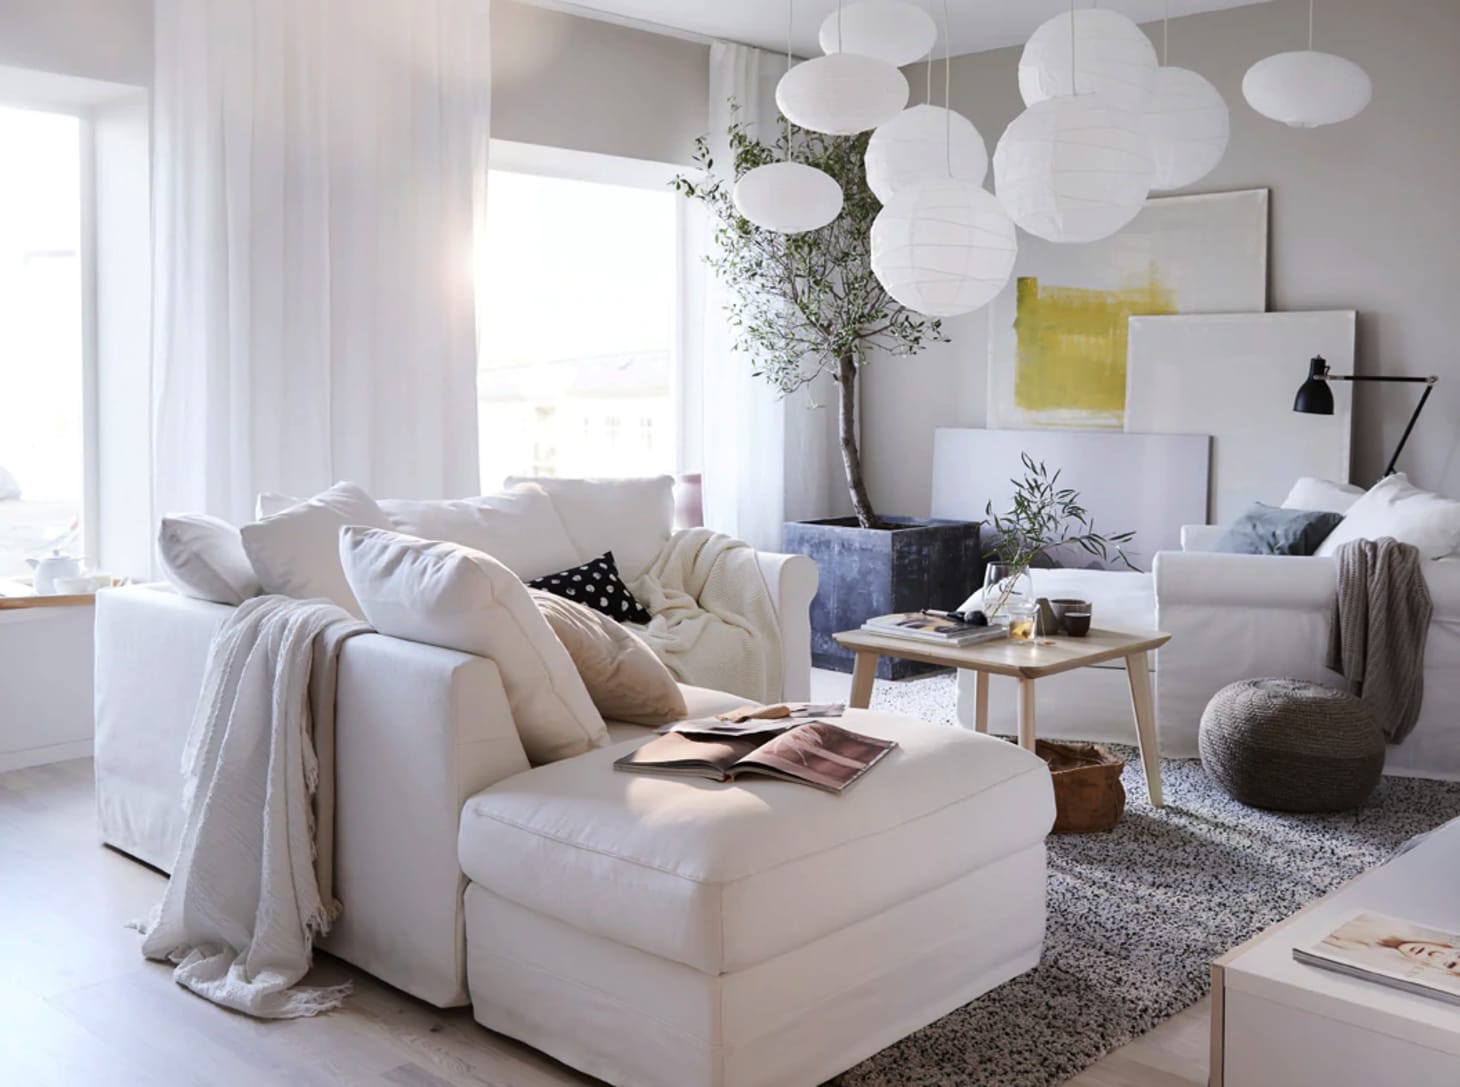 Cozy IKEA Living Room Design Ideas - IKEA Living Rooms | Apartment Therapy